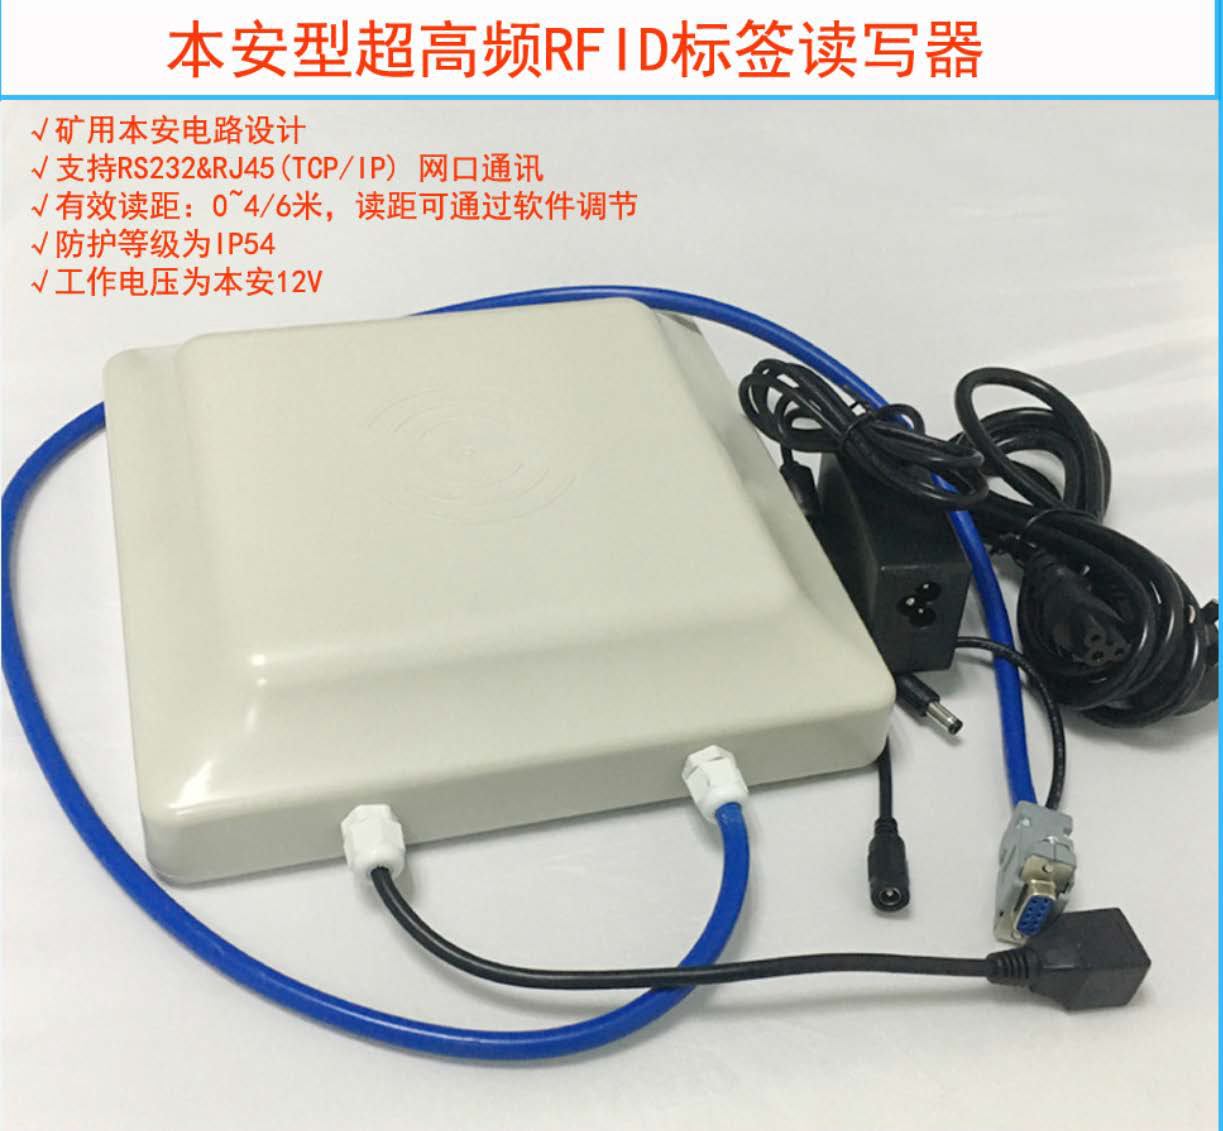 Intrinsically safe integrated ultra-high frequency RFID card reader, mining identifier RJ45 232 485 interface